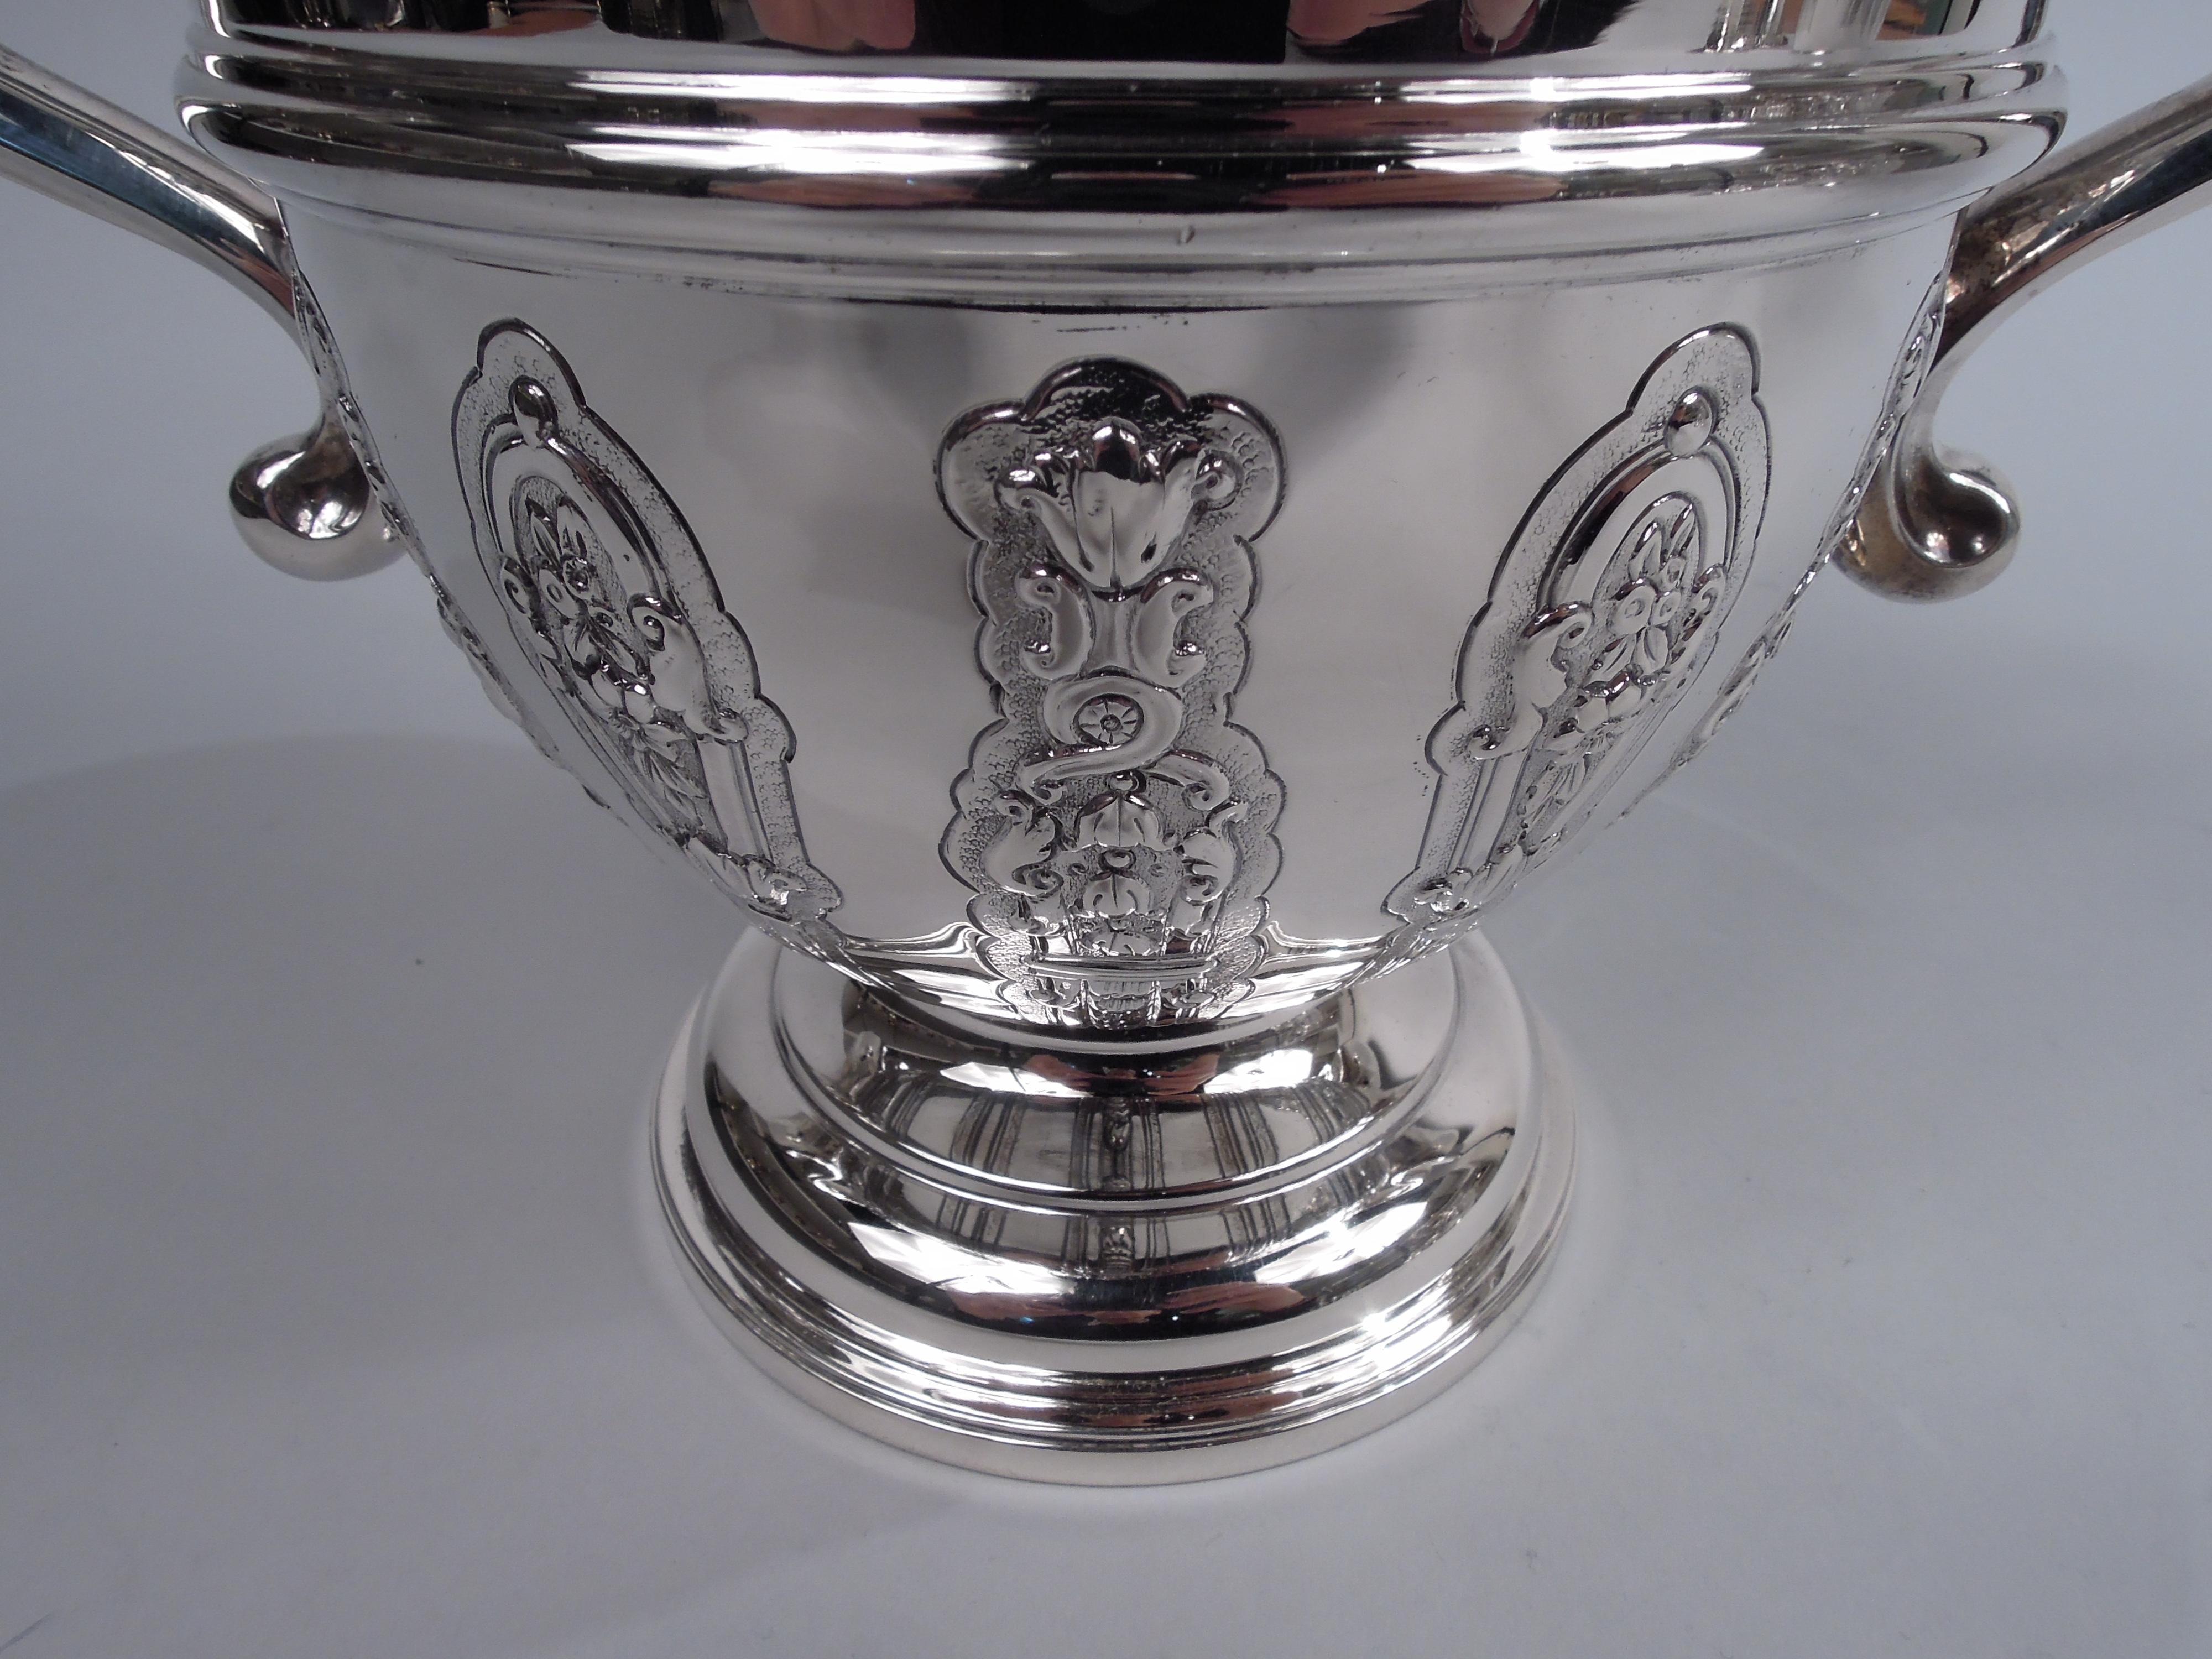 Crichton English Neoclassical Sterling Silver Covered Urn 1916 For Sale 4